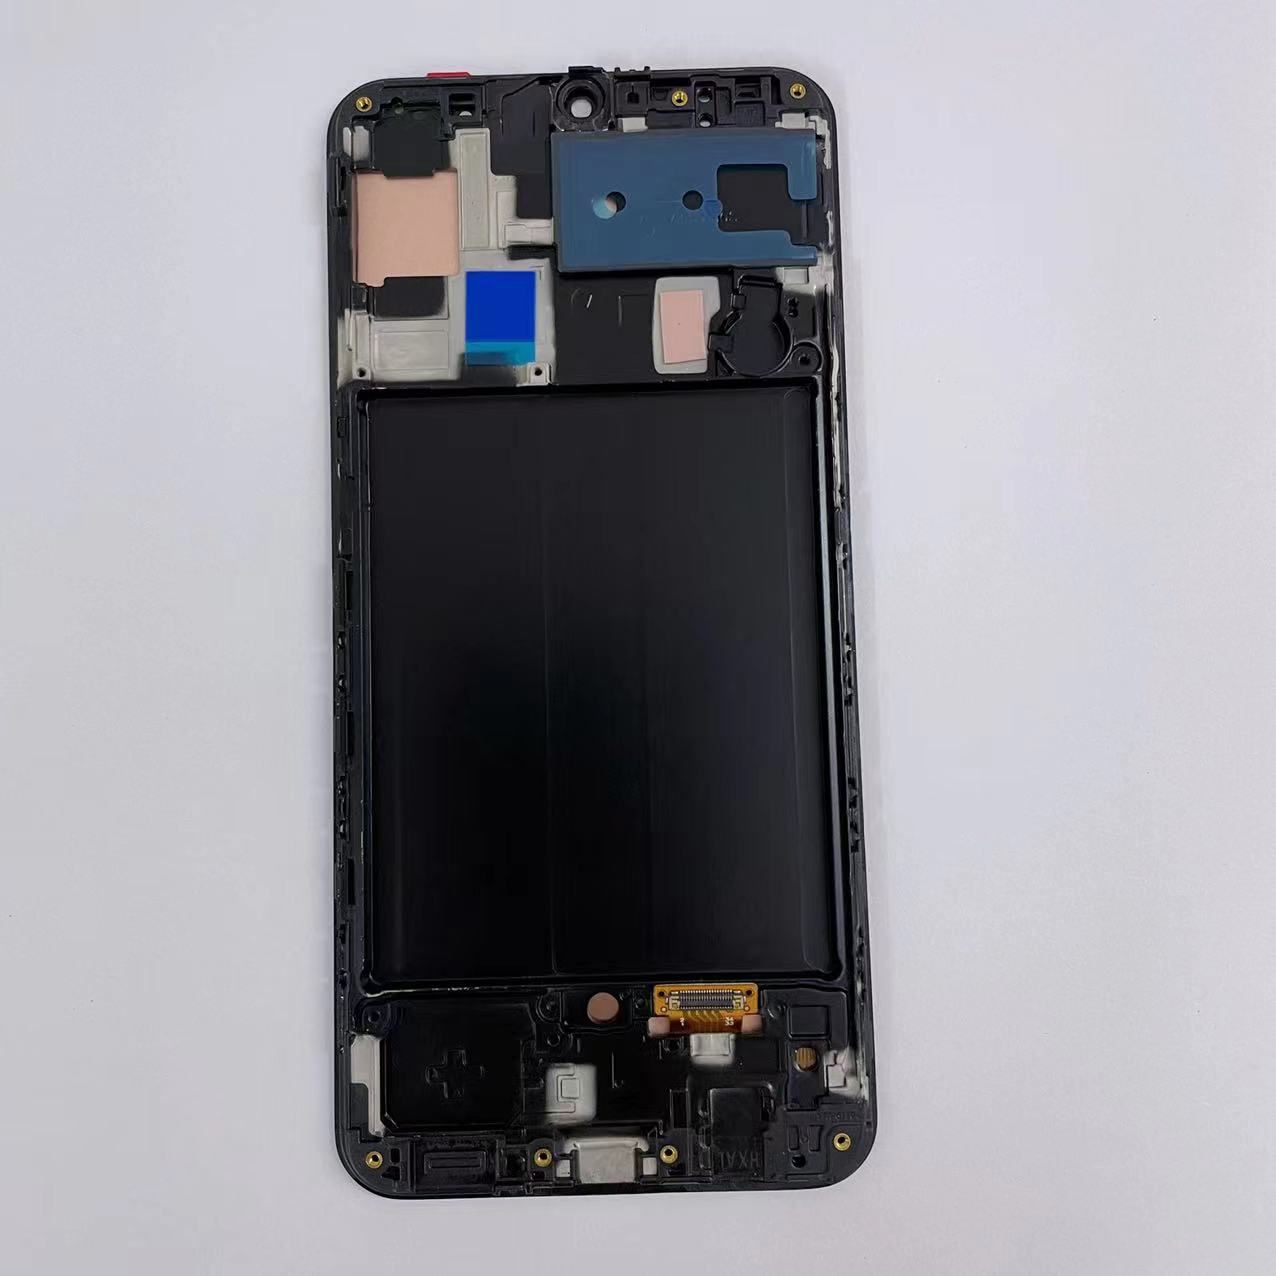 For Samsung A50 OLED WF Lcd Screen display and Lcd Screen replacement